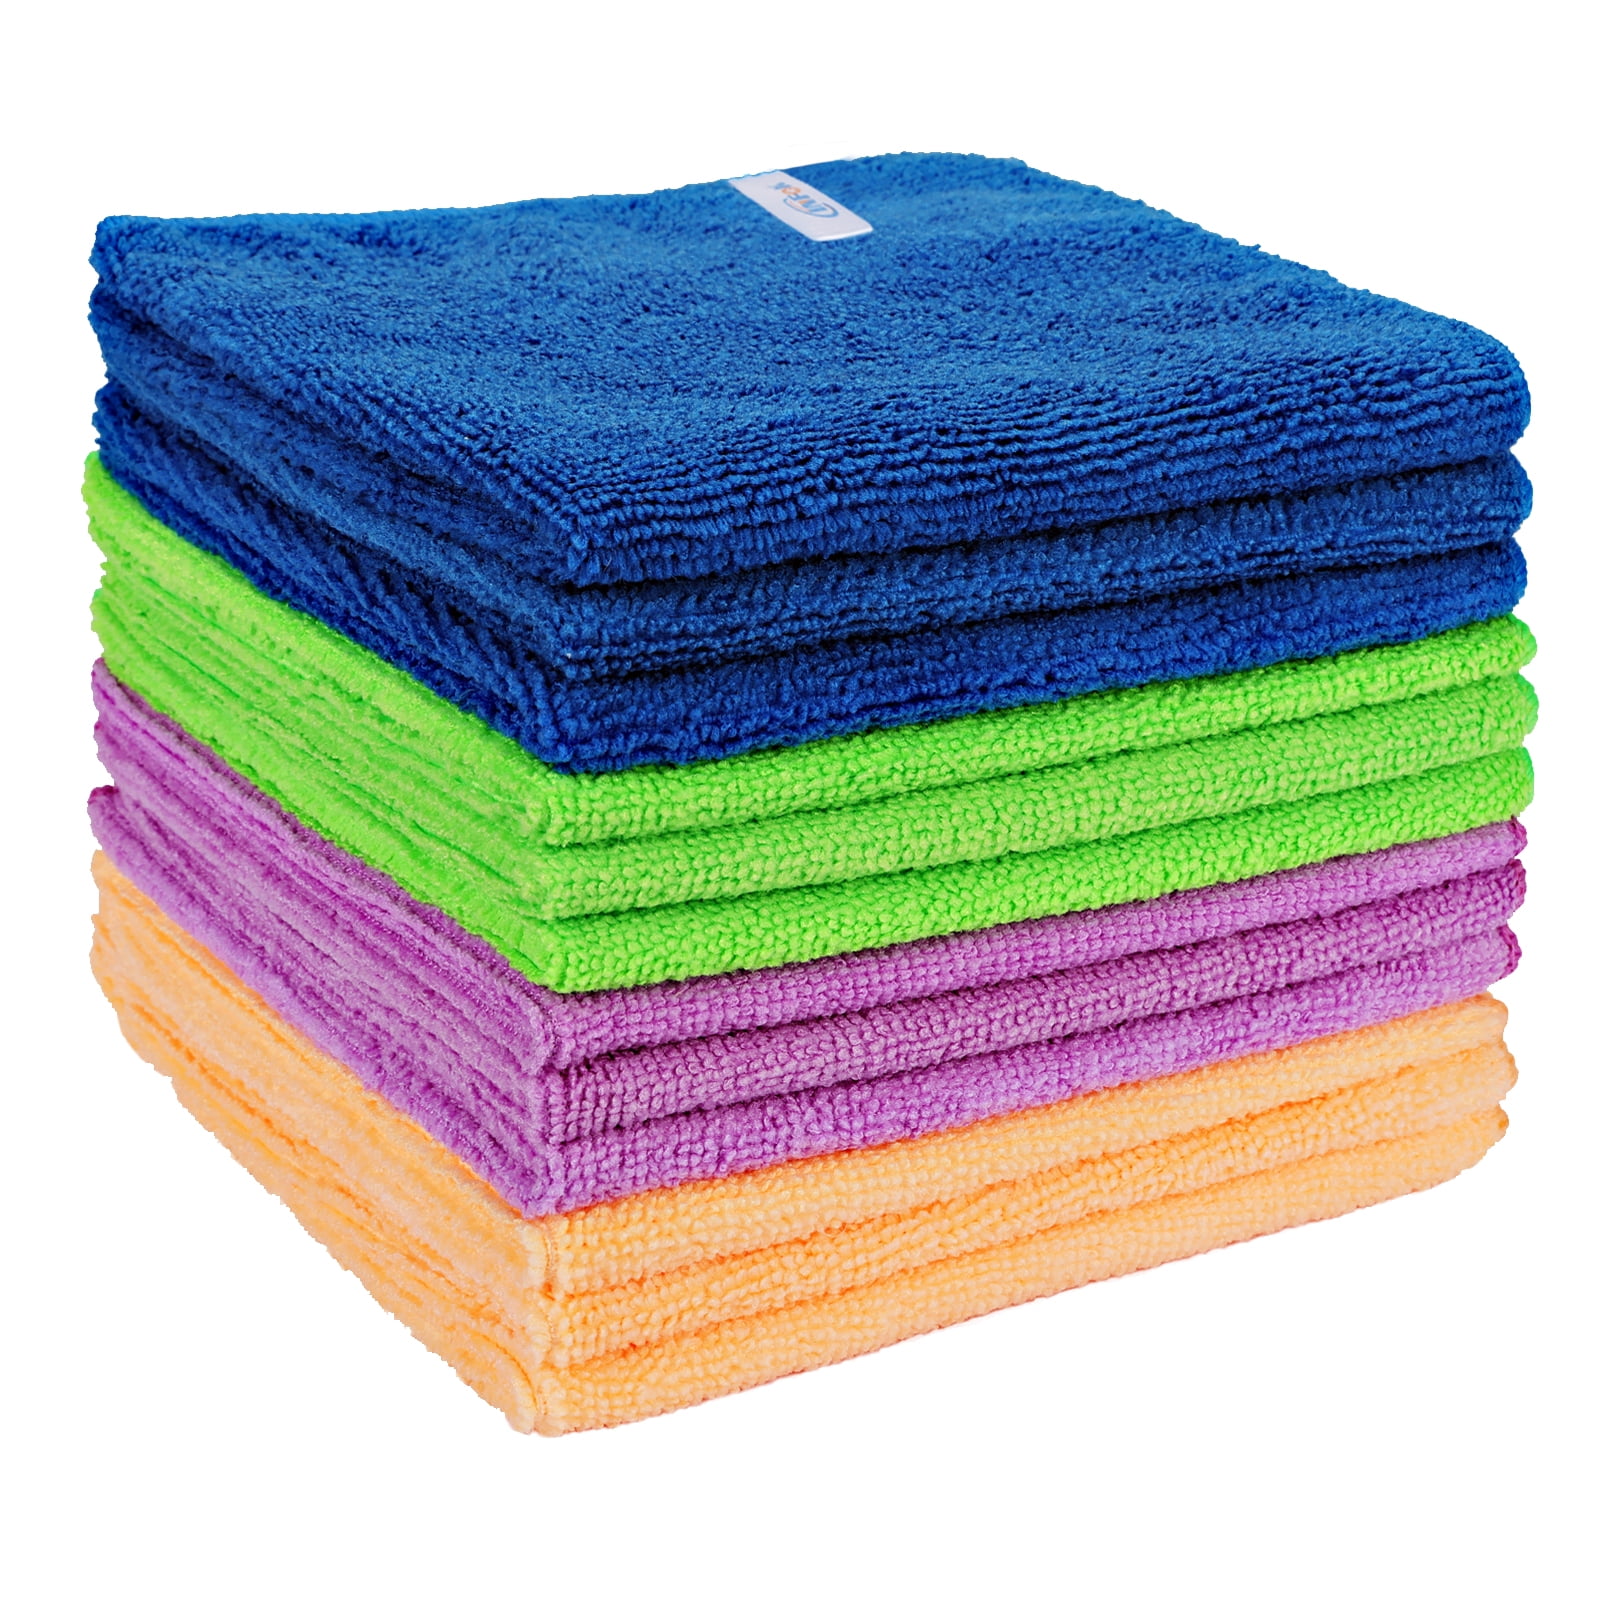 OVWO 12Pcs Premium Microfiber Cleaning Cloth for Household Cleaning, 12 ...